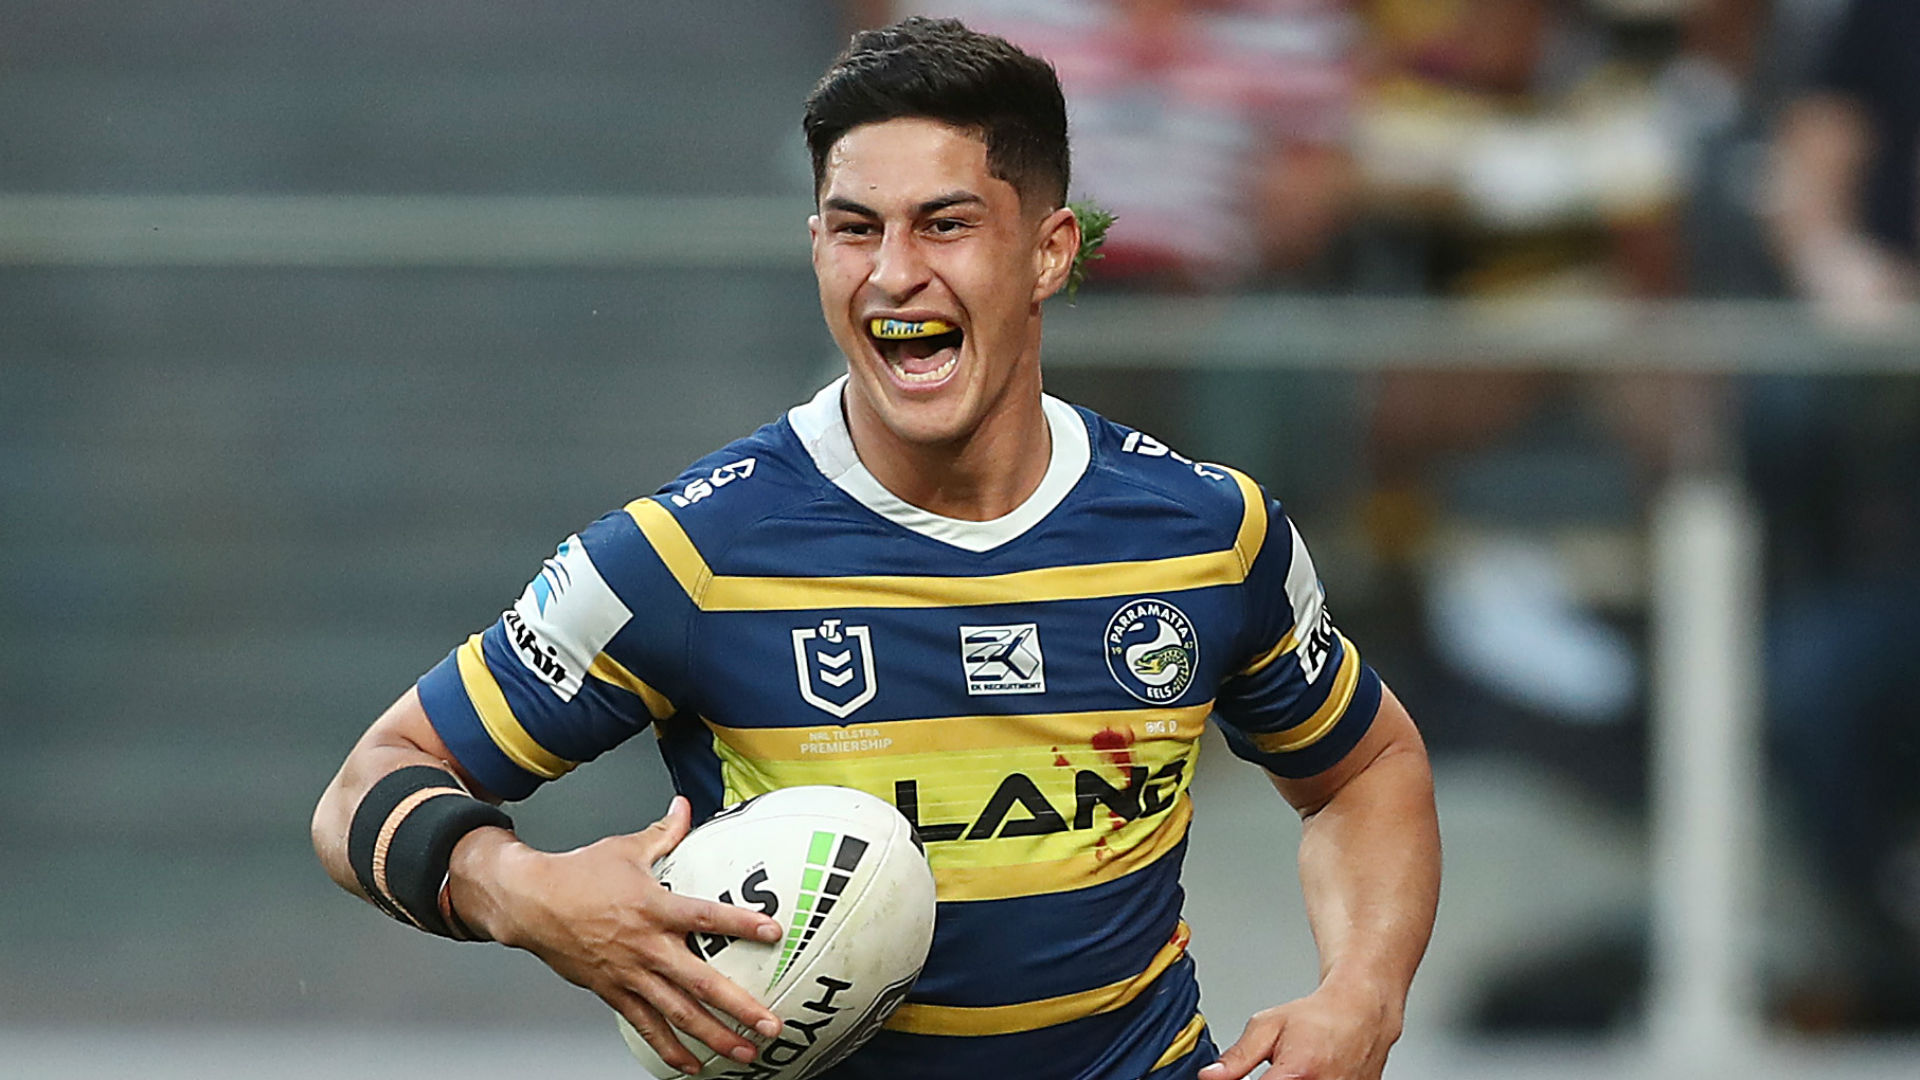 Parramatta Eels handed Dylan Brown a three-year contract extension, extinguishing rumours he could leave for an NRL rival.